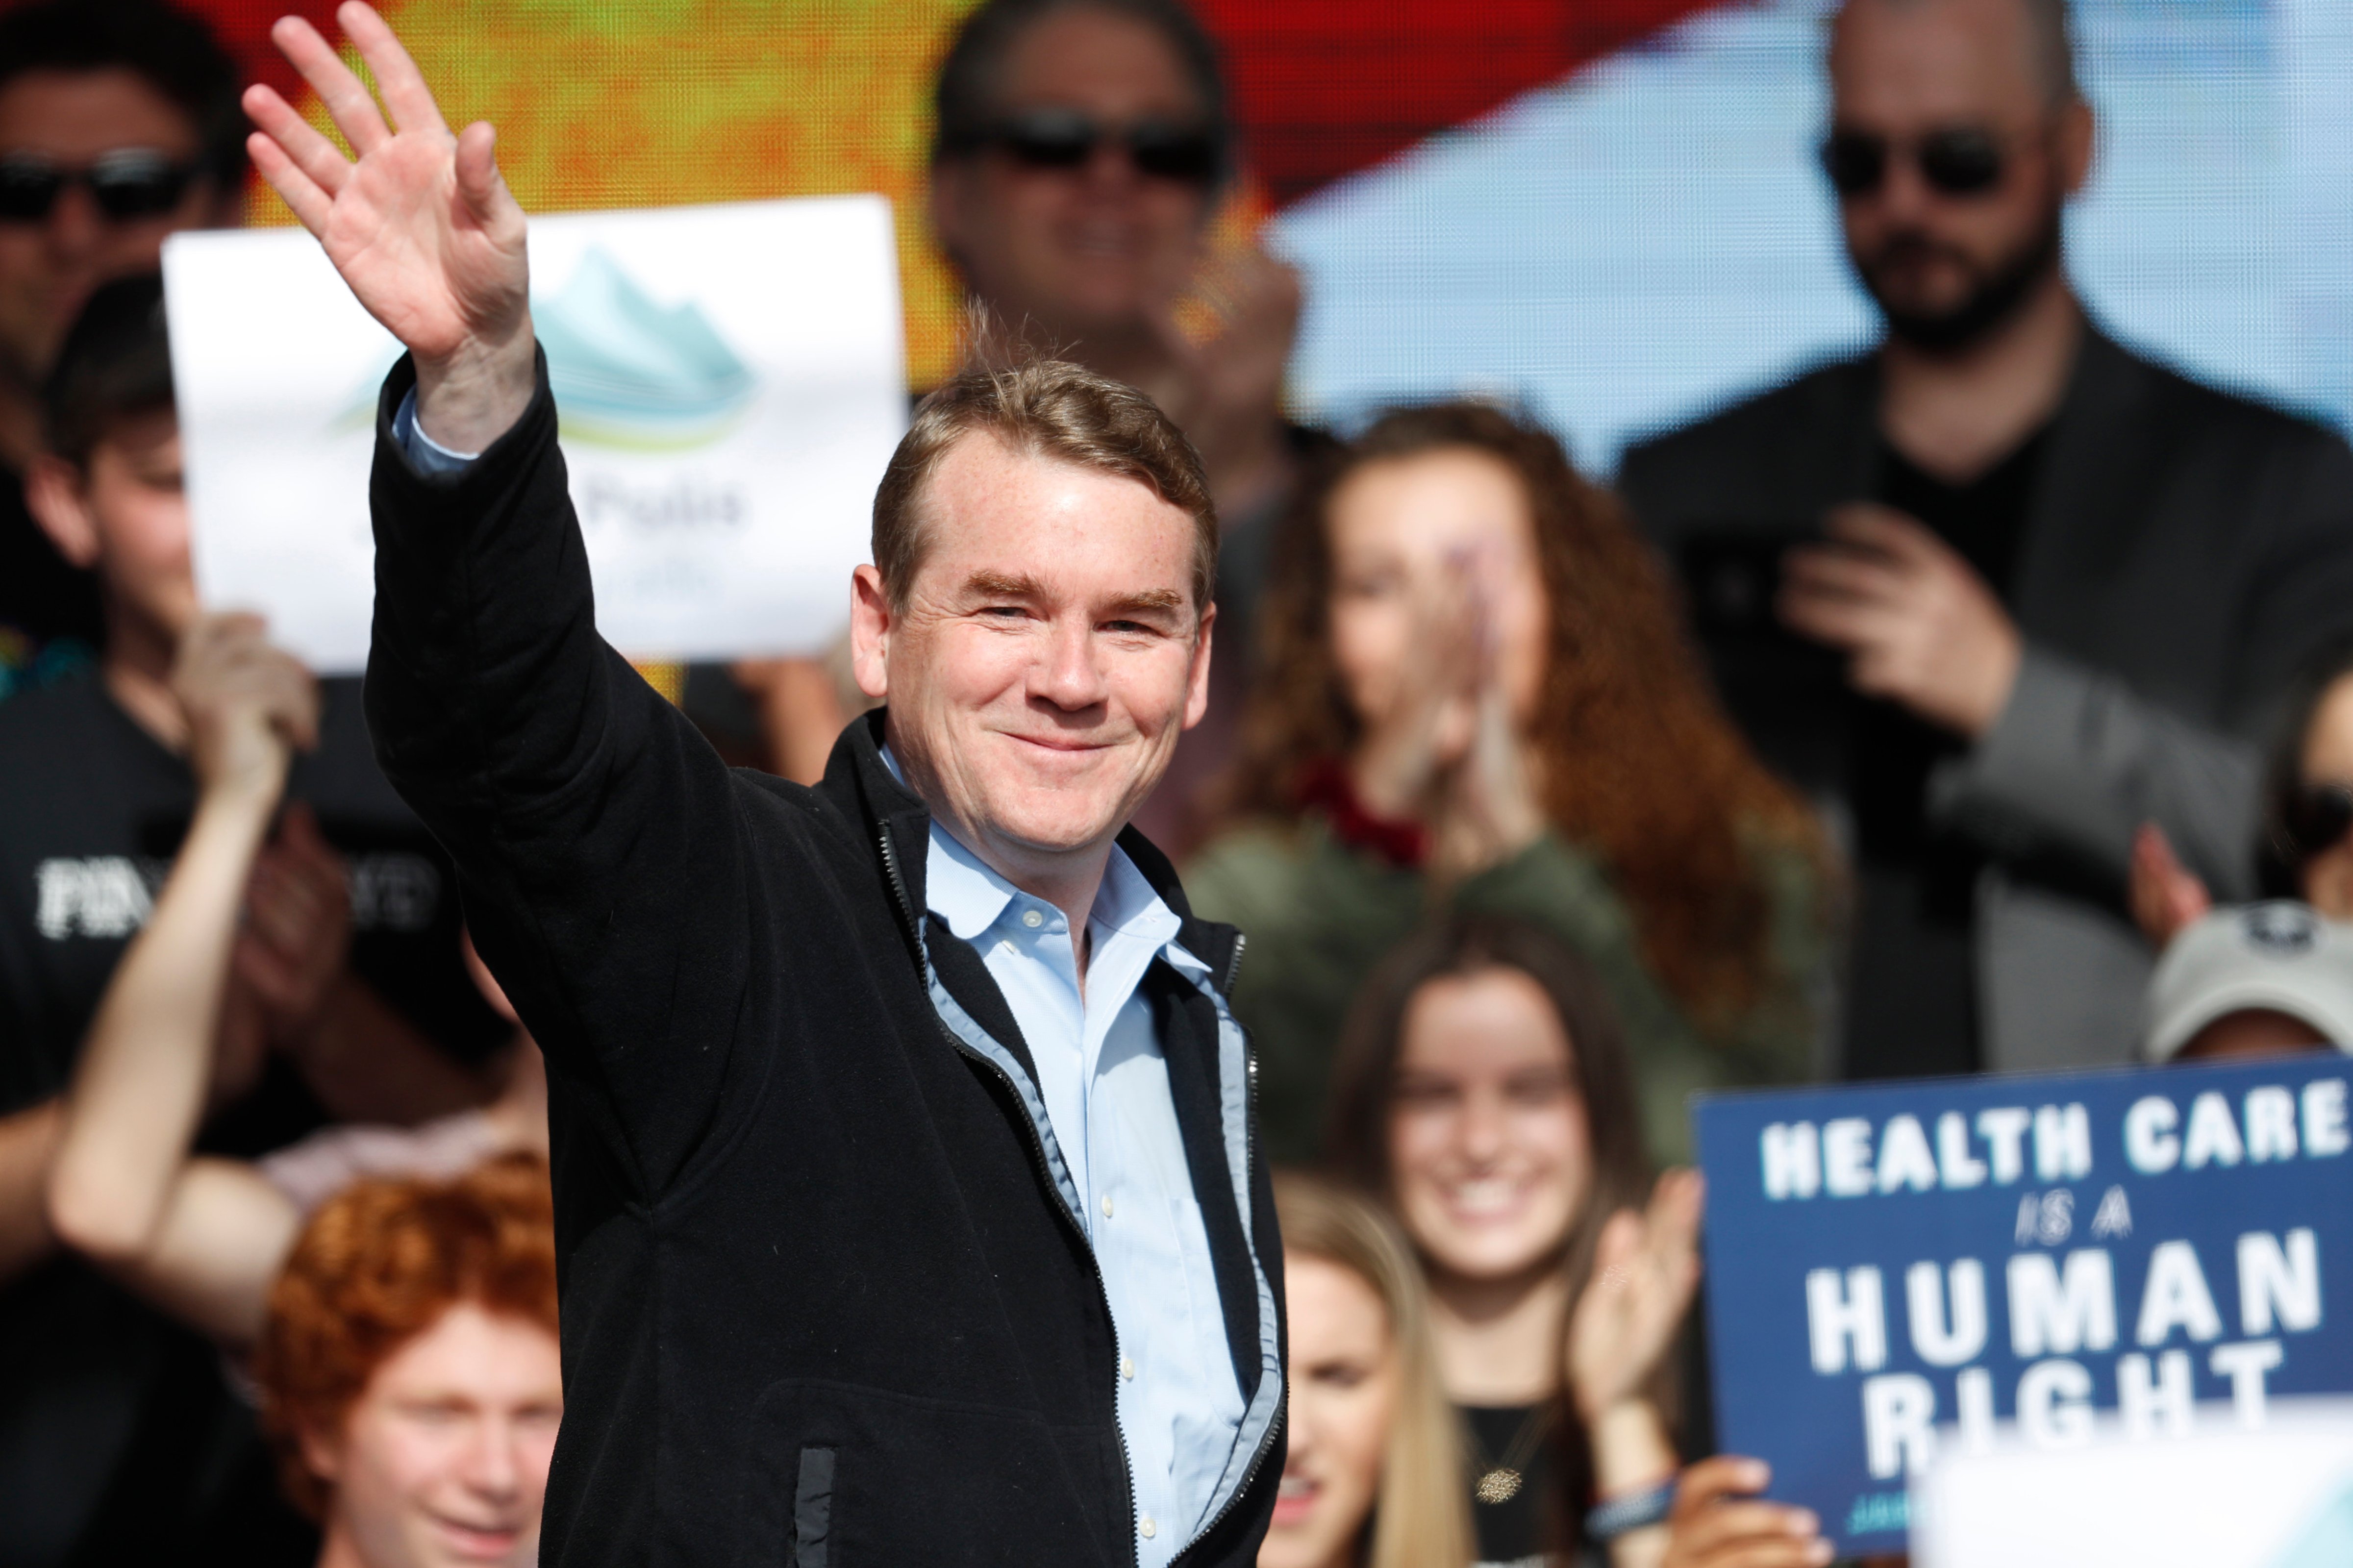 U.S. Senator Michael Bennet greets voters during a rally with young voters on the campus of the University of Colorado in Boulder, Colo. on Oct. 24, 2018. Bennet says he is seeking the Democratic nomination for president in 2020. The three-term senator made the announcement Thursday on “CBS This Morning.” (David Zalubowski—AP)